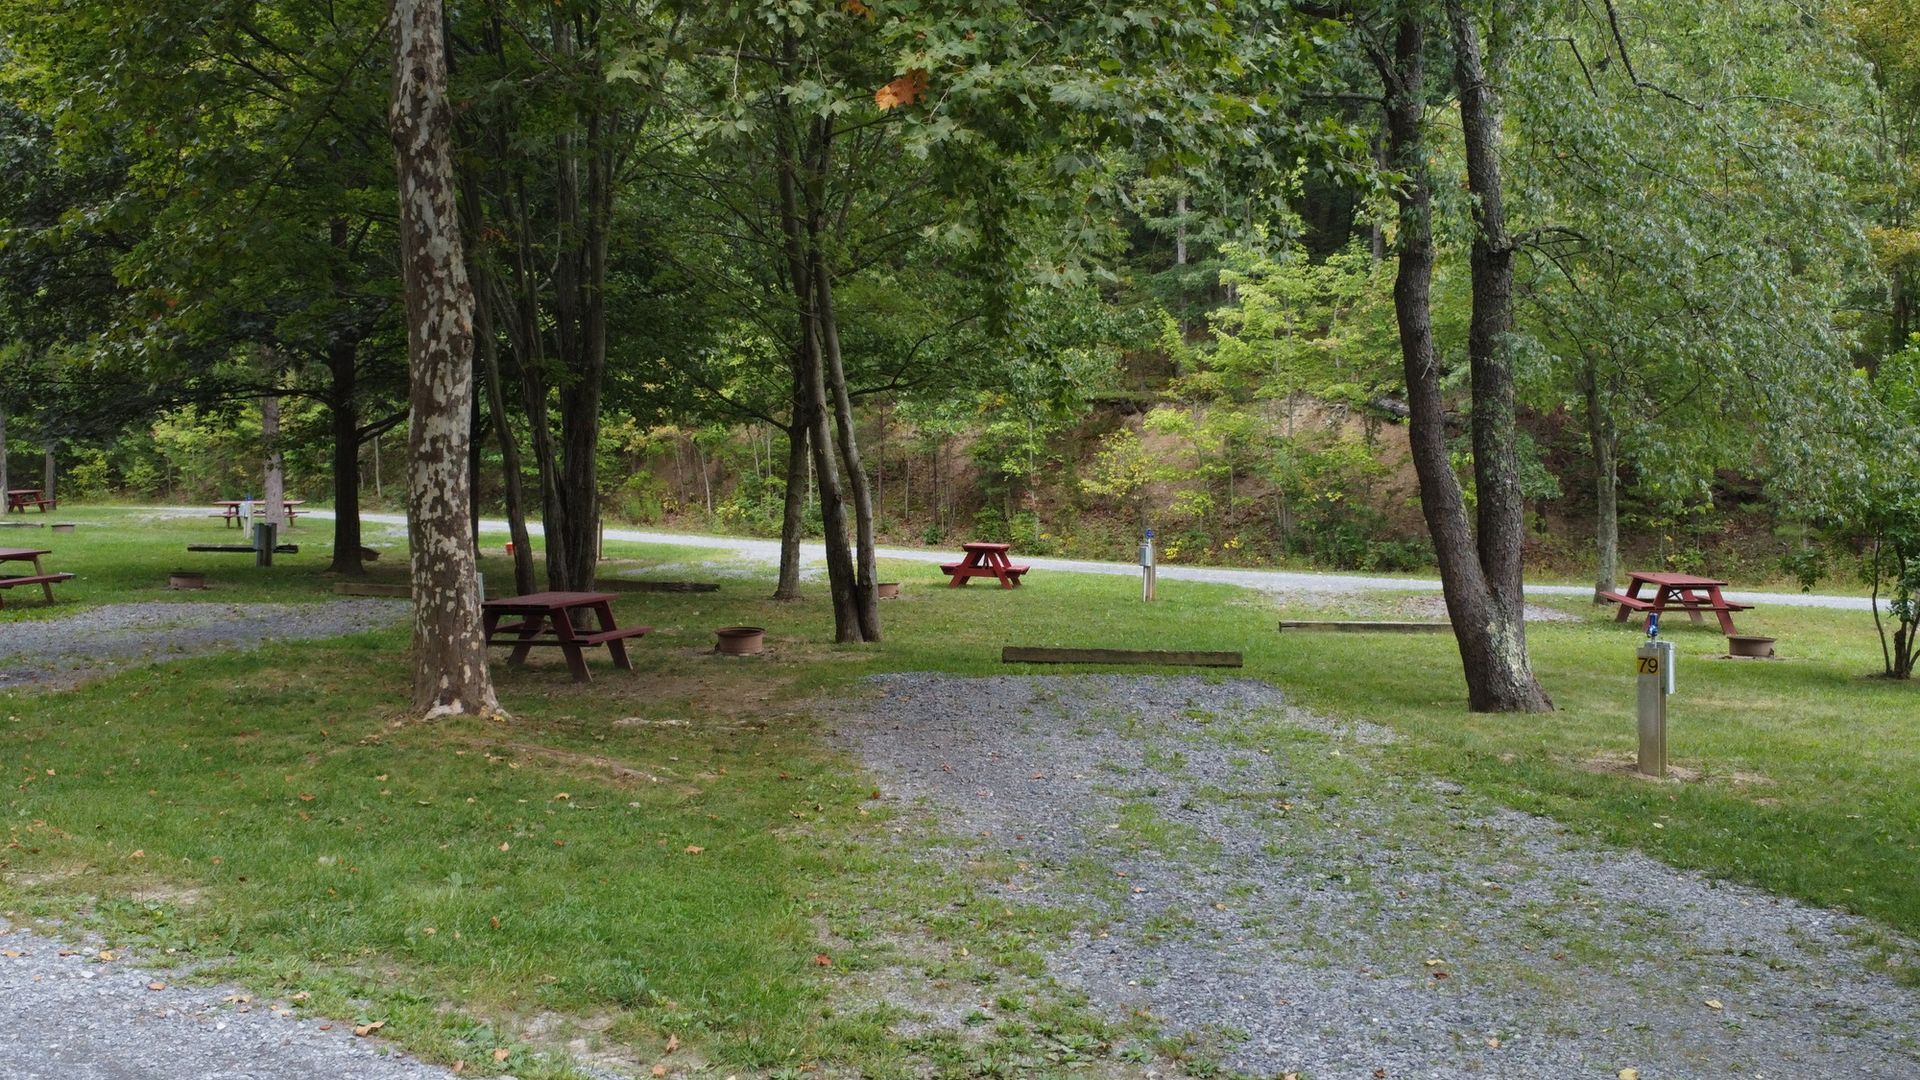 A park with a lot of trees and picnic tables.